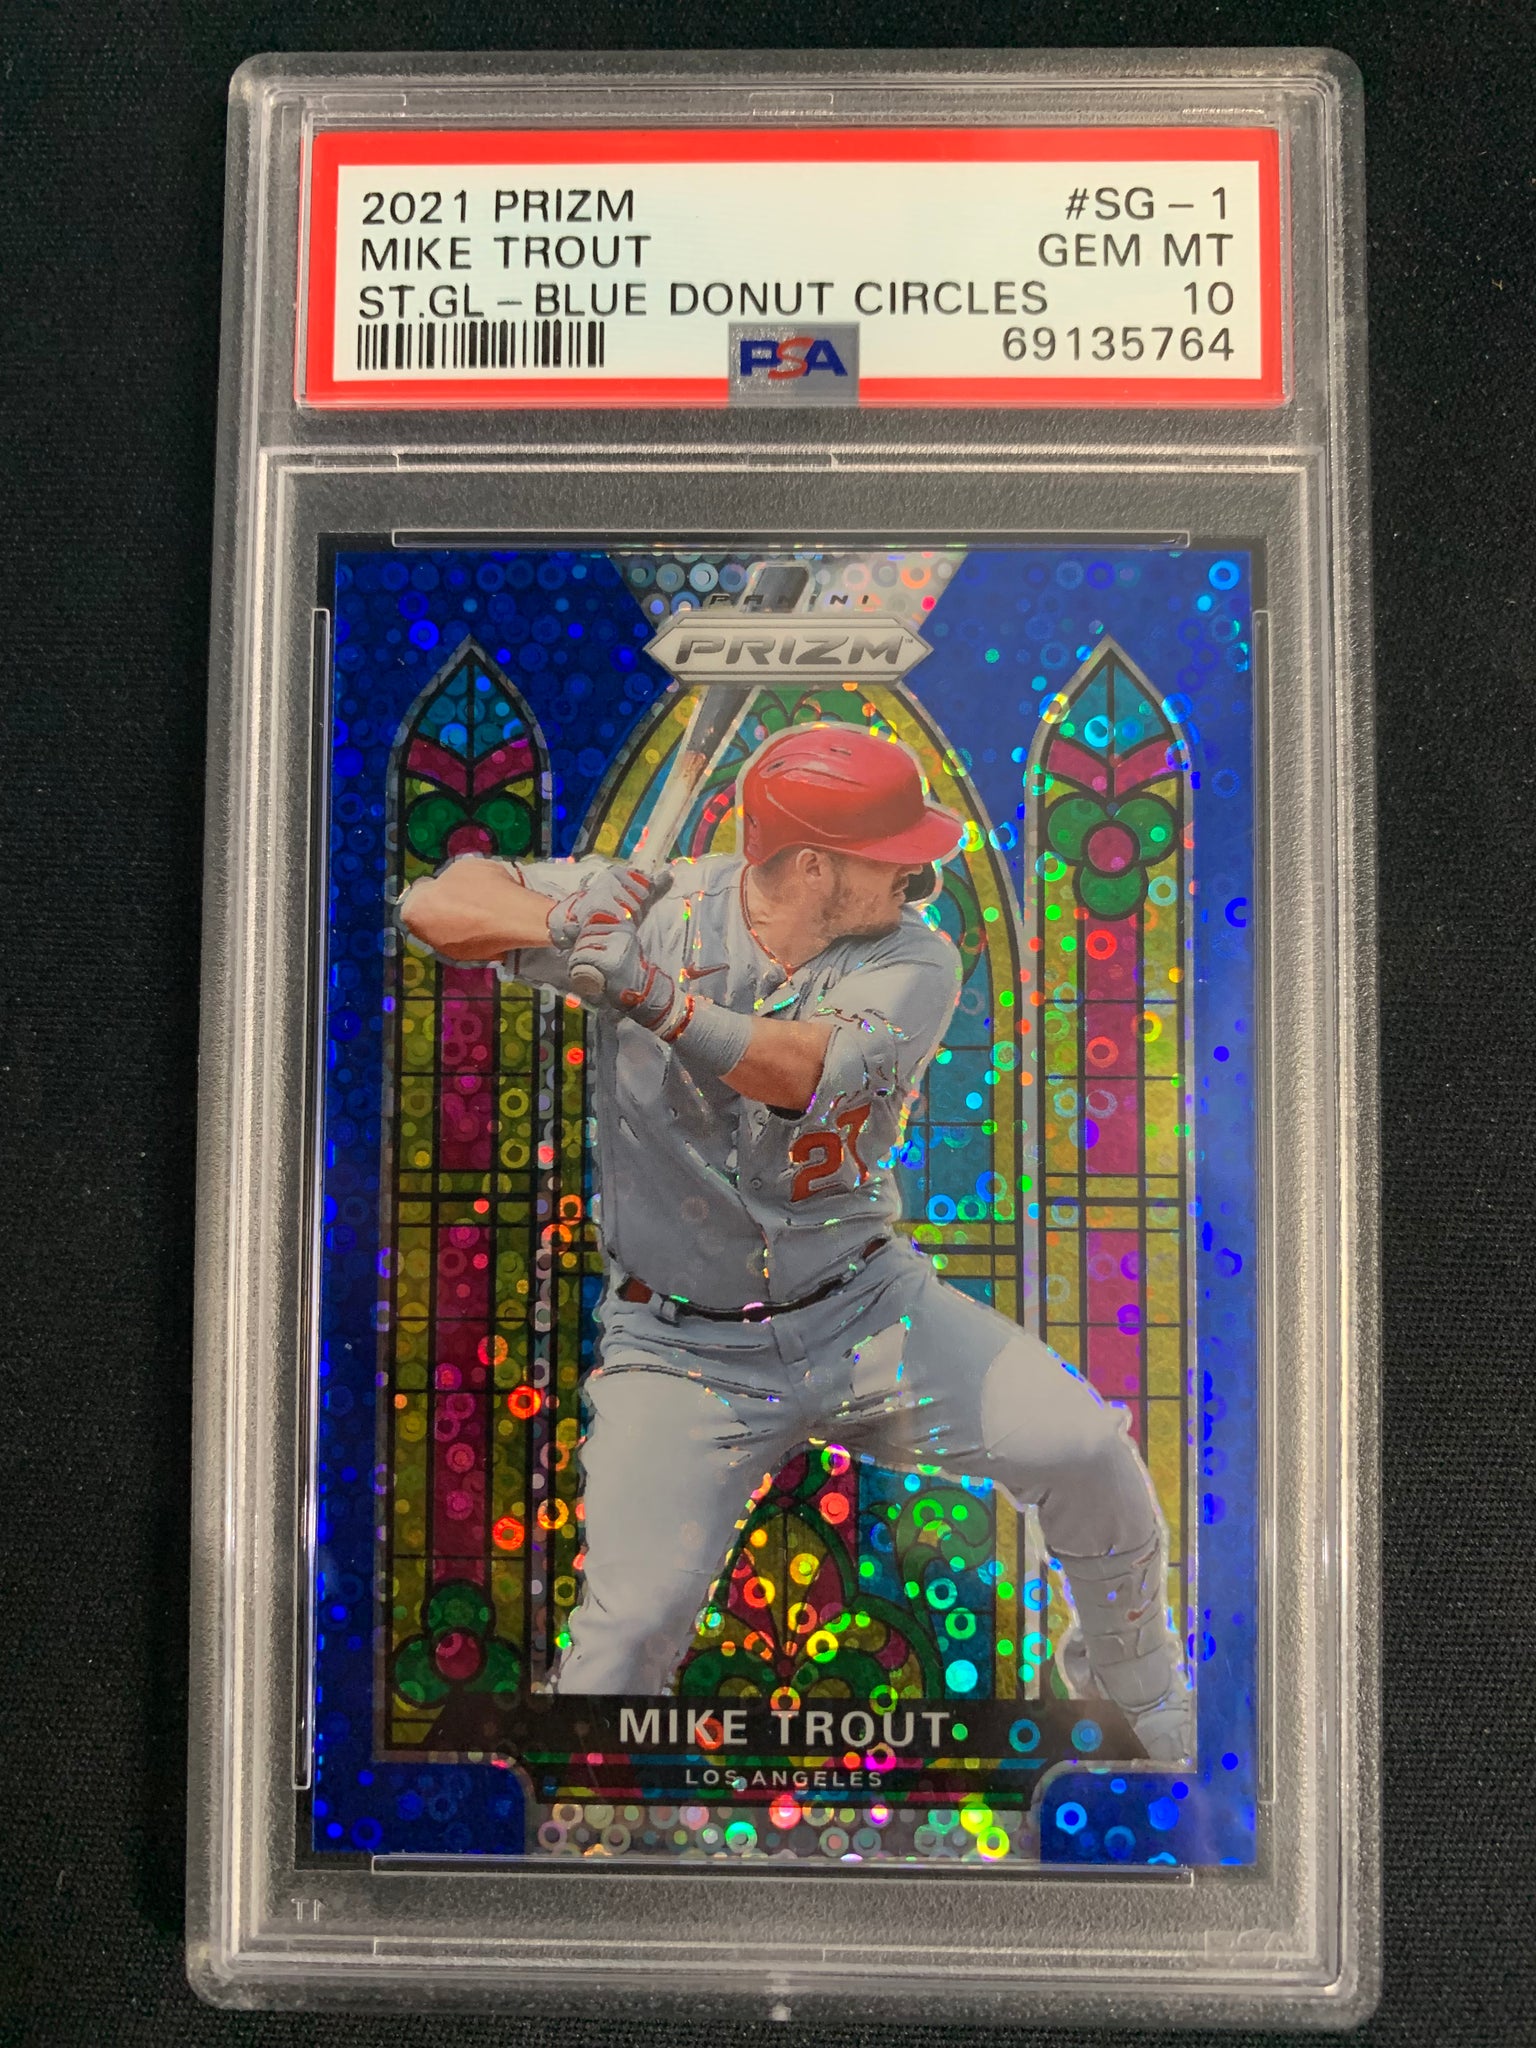 2021 PANINI PRIZM BASEBALL #SG-1 LOS ANGELES ANGELS - MIKE TROUT BLUE DONUT CIRCLES PRIZM STAINED GLASS GRADED PSA 10 GEM MINT